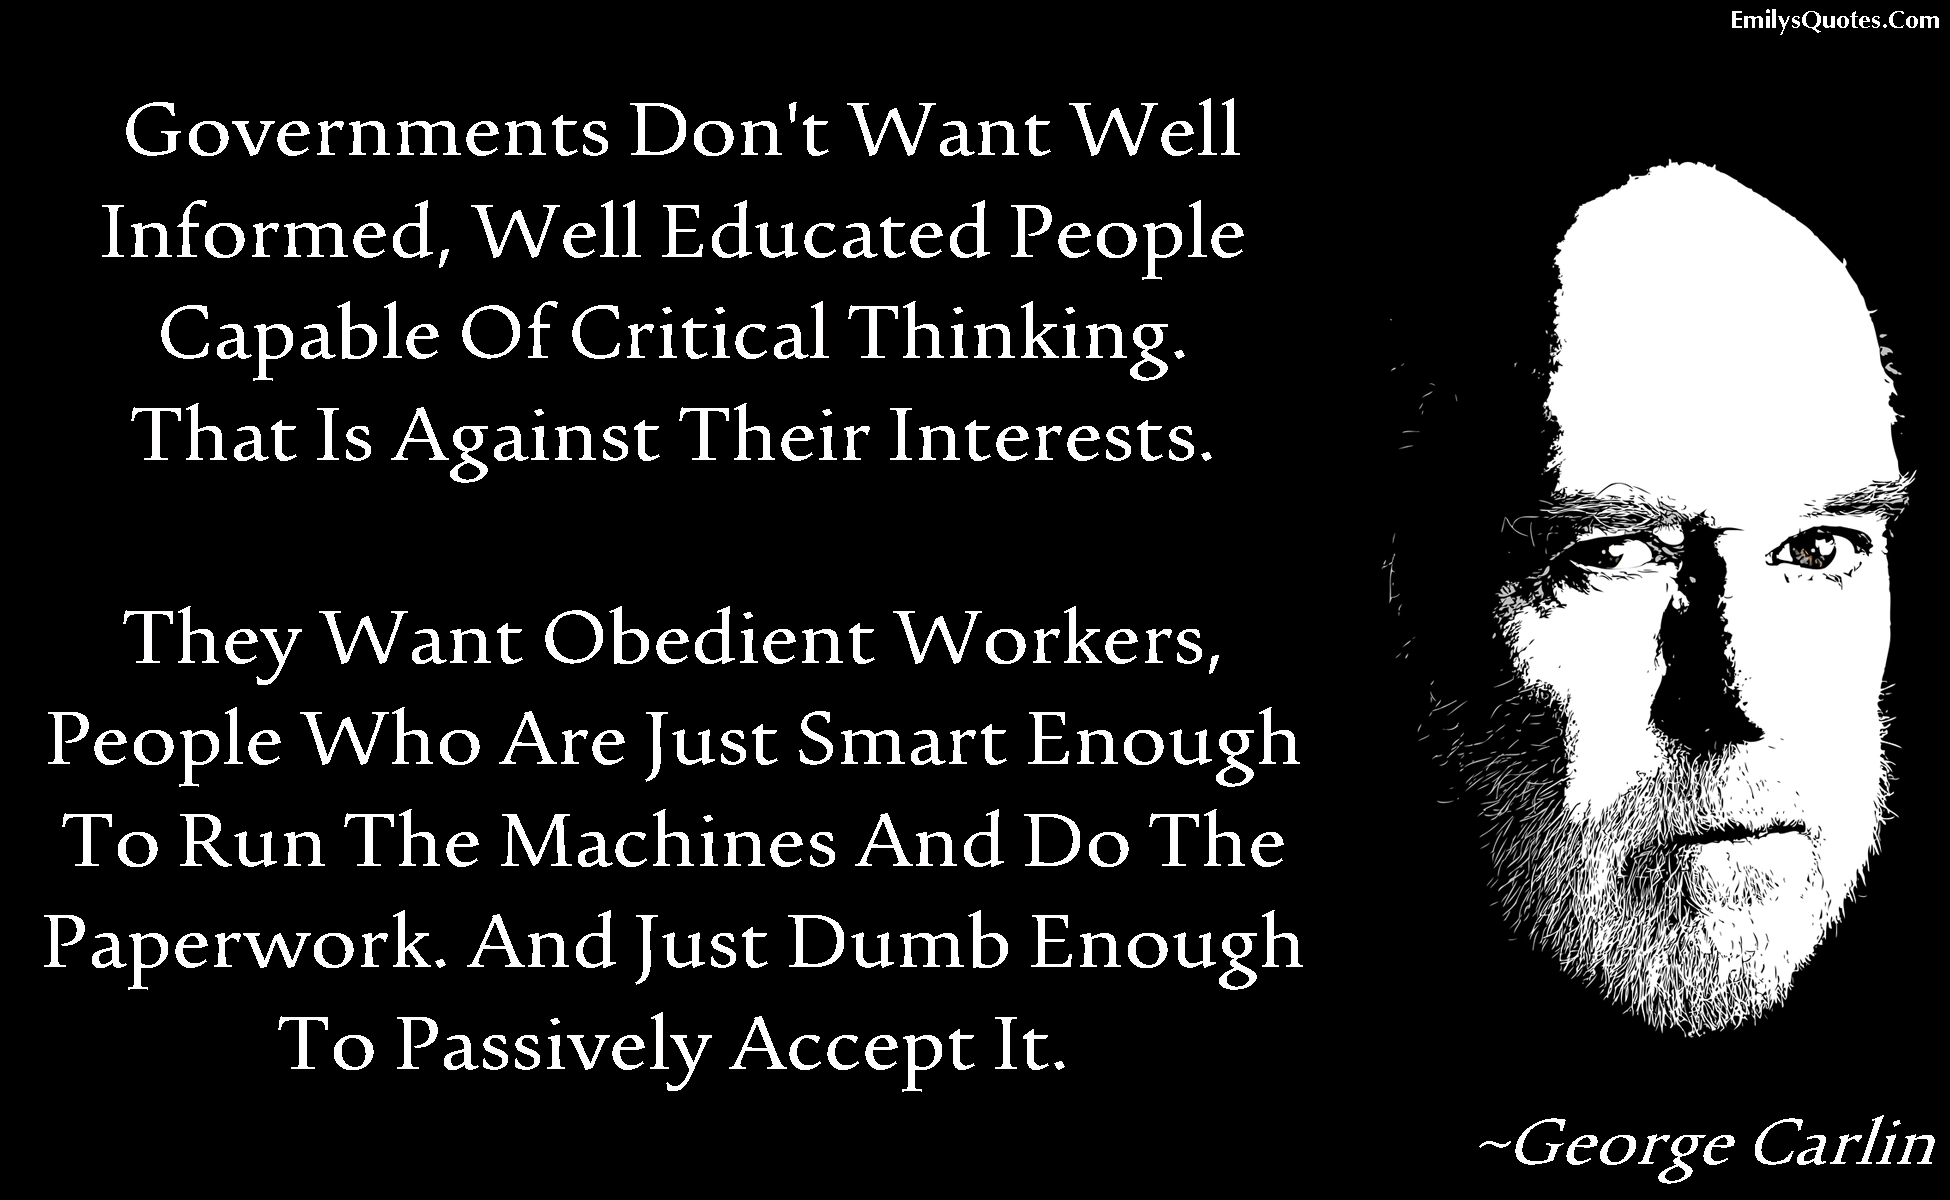 Governments don’t want well informed, well educated people capable of critical thinking. That is against their interests.  They want obedient workers, people who are just smart enough to run the machines and do the paperwork. And just dumb enough to passively accept it